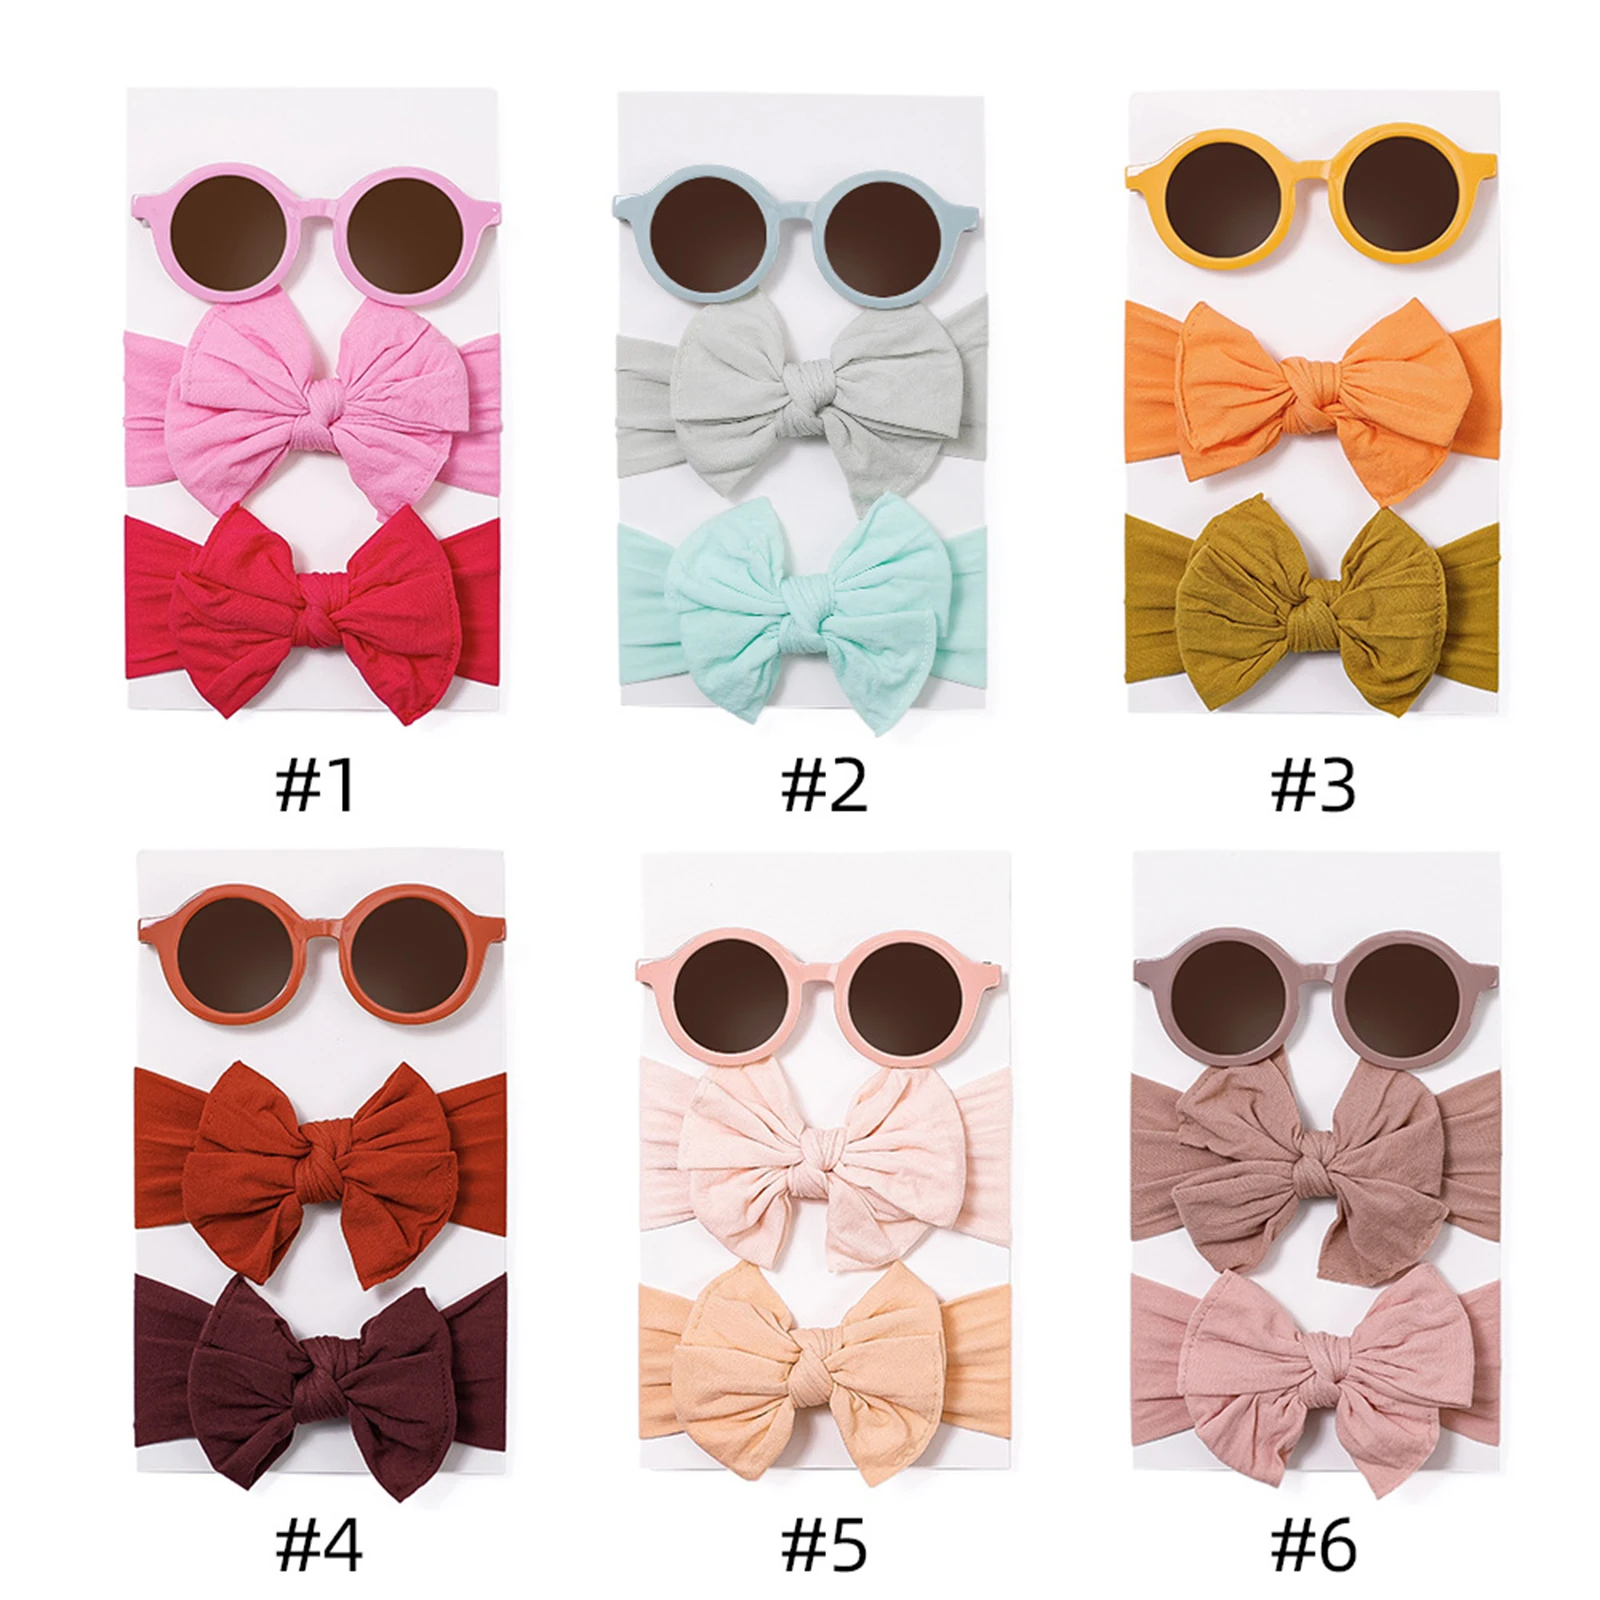 EWODOS Baby Kids Girls Headwear Sets Sunglasses with Headbands Round Sunglasses with Bow Hairbands Party Favor for Baby Kids 4 sets childrens toys suspension ball blowing machine birthday party favor kids funny wood balls pipe